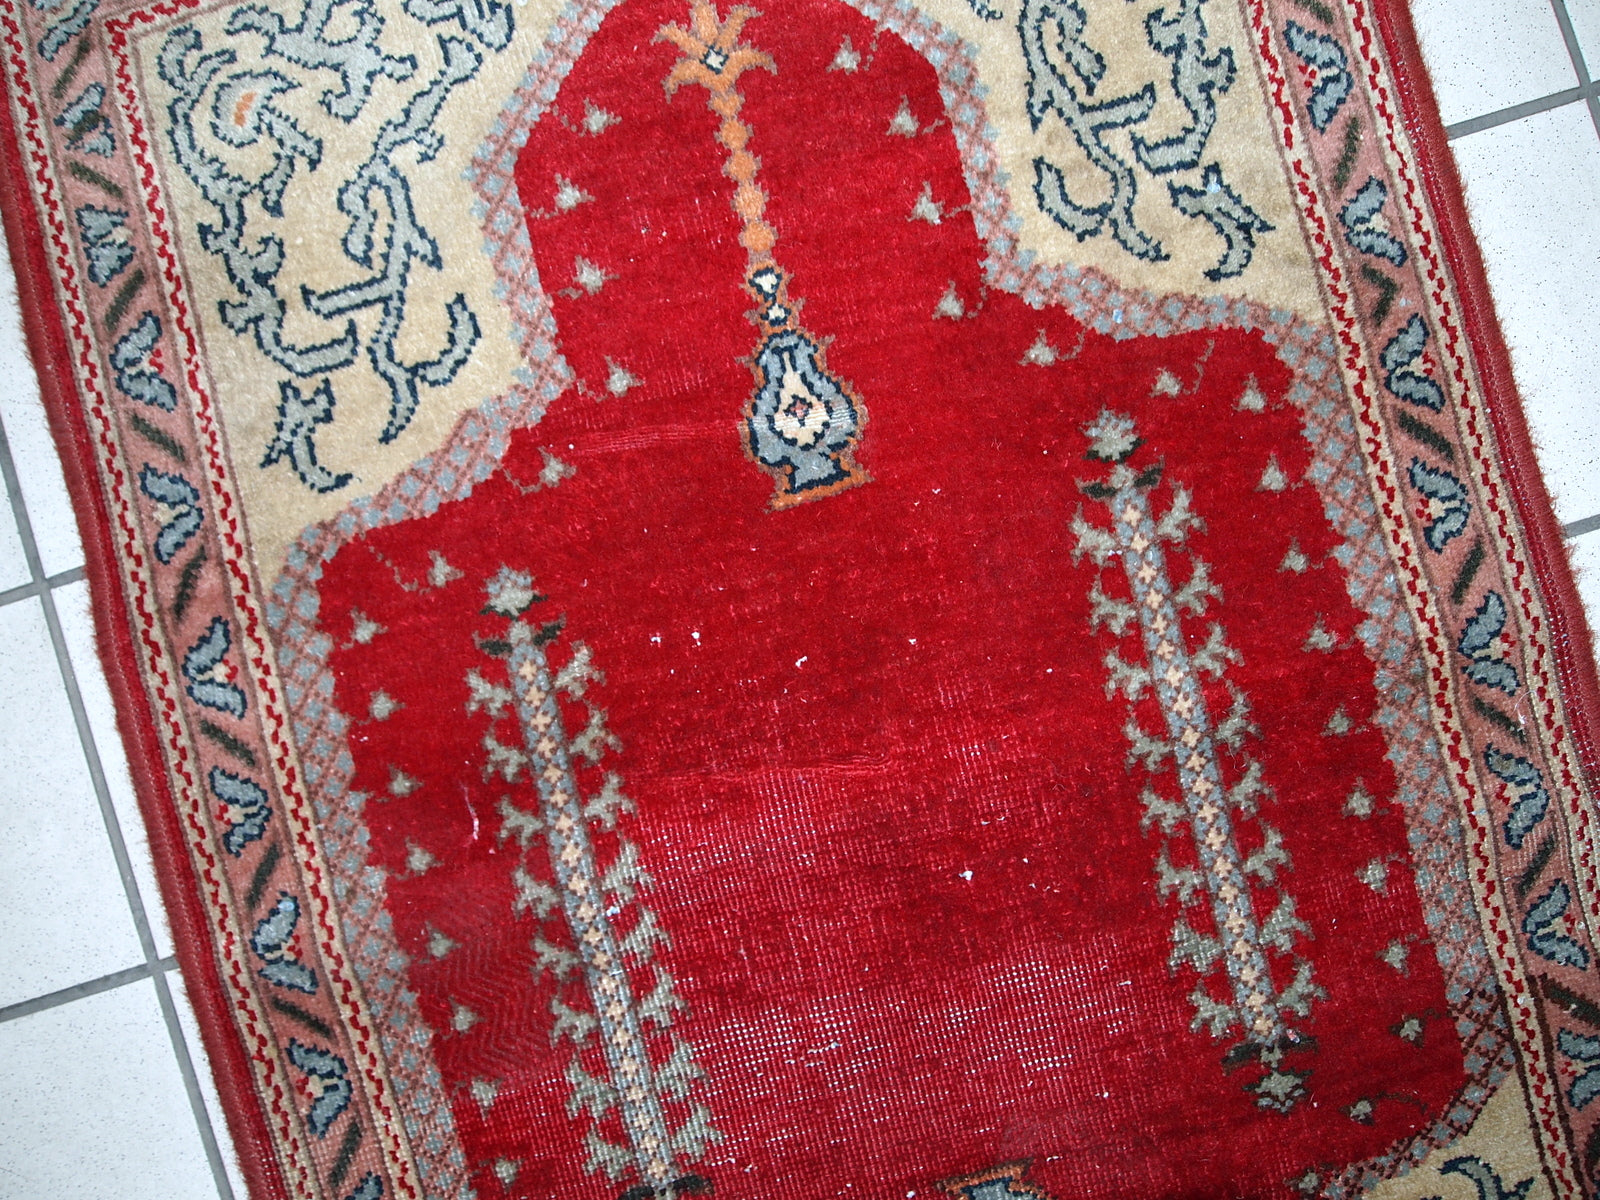 Antique Turkish Konya rug in bright red shade. It has some low pile, but generally in original good condition.